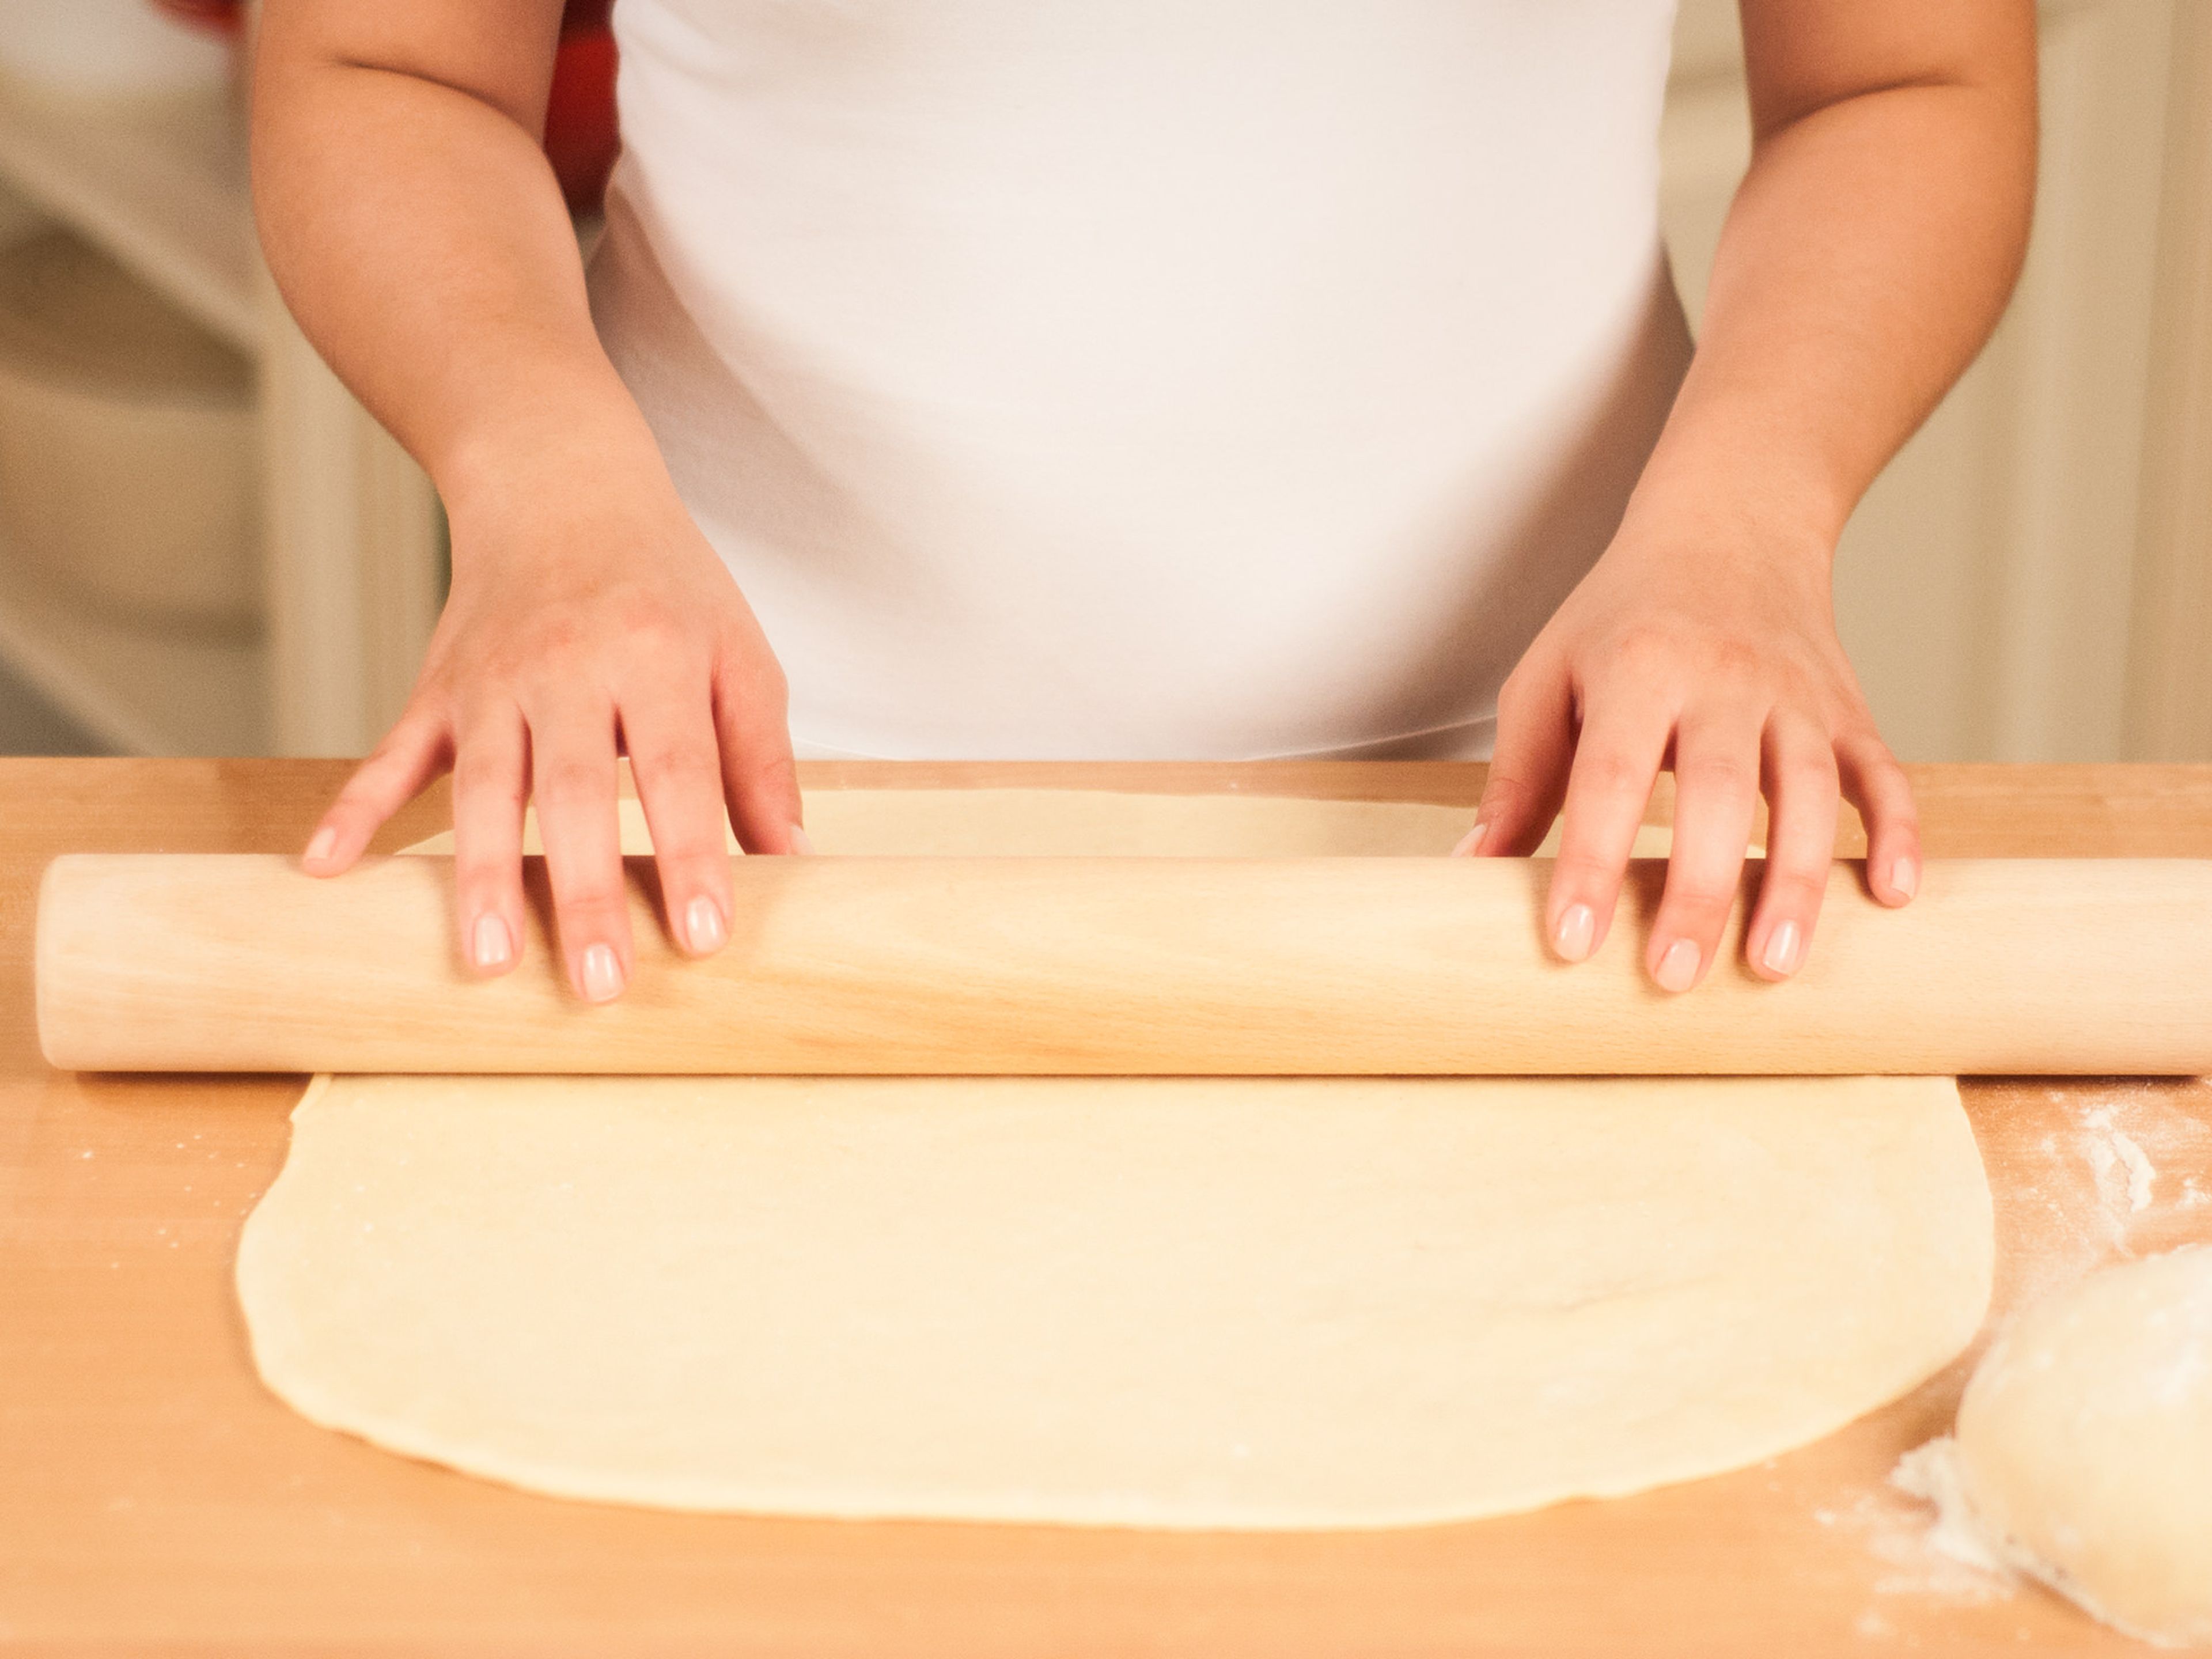 Once the dough has risen, dust a clean working surface with flour and place the dough on it. Cut the dough in half and roll each half into the shape of a rectangle, approx. 3 mm thick.